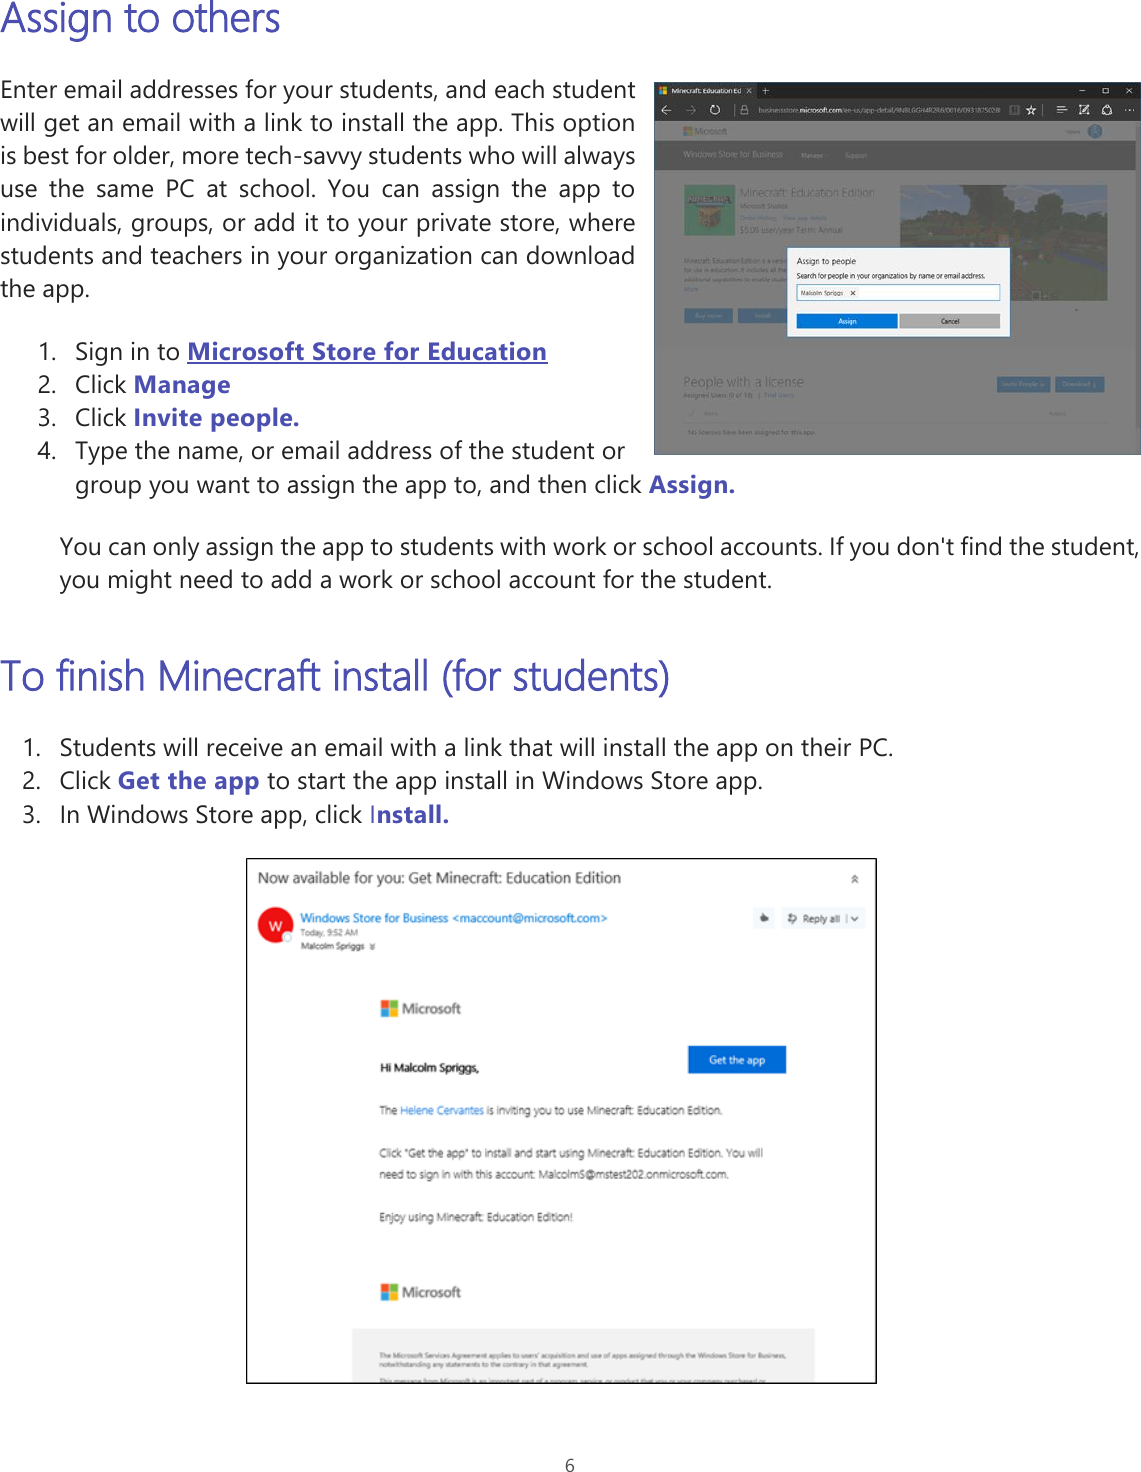 Page 6 of 11 - Microsoft Teams Team Leader Getting Started Guide MEE Educator Deployment